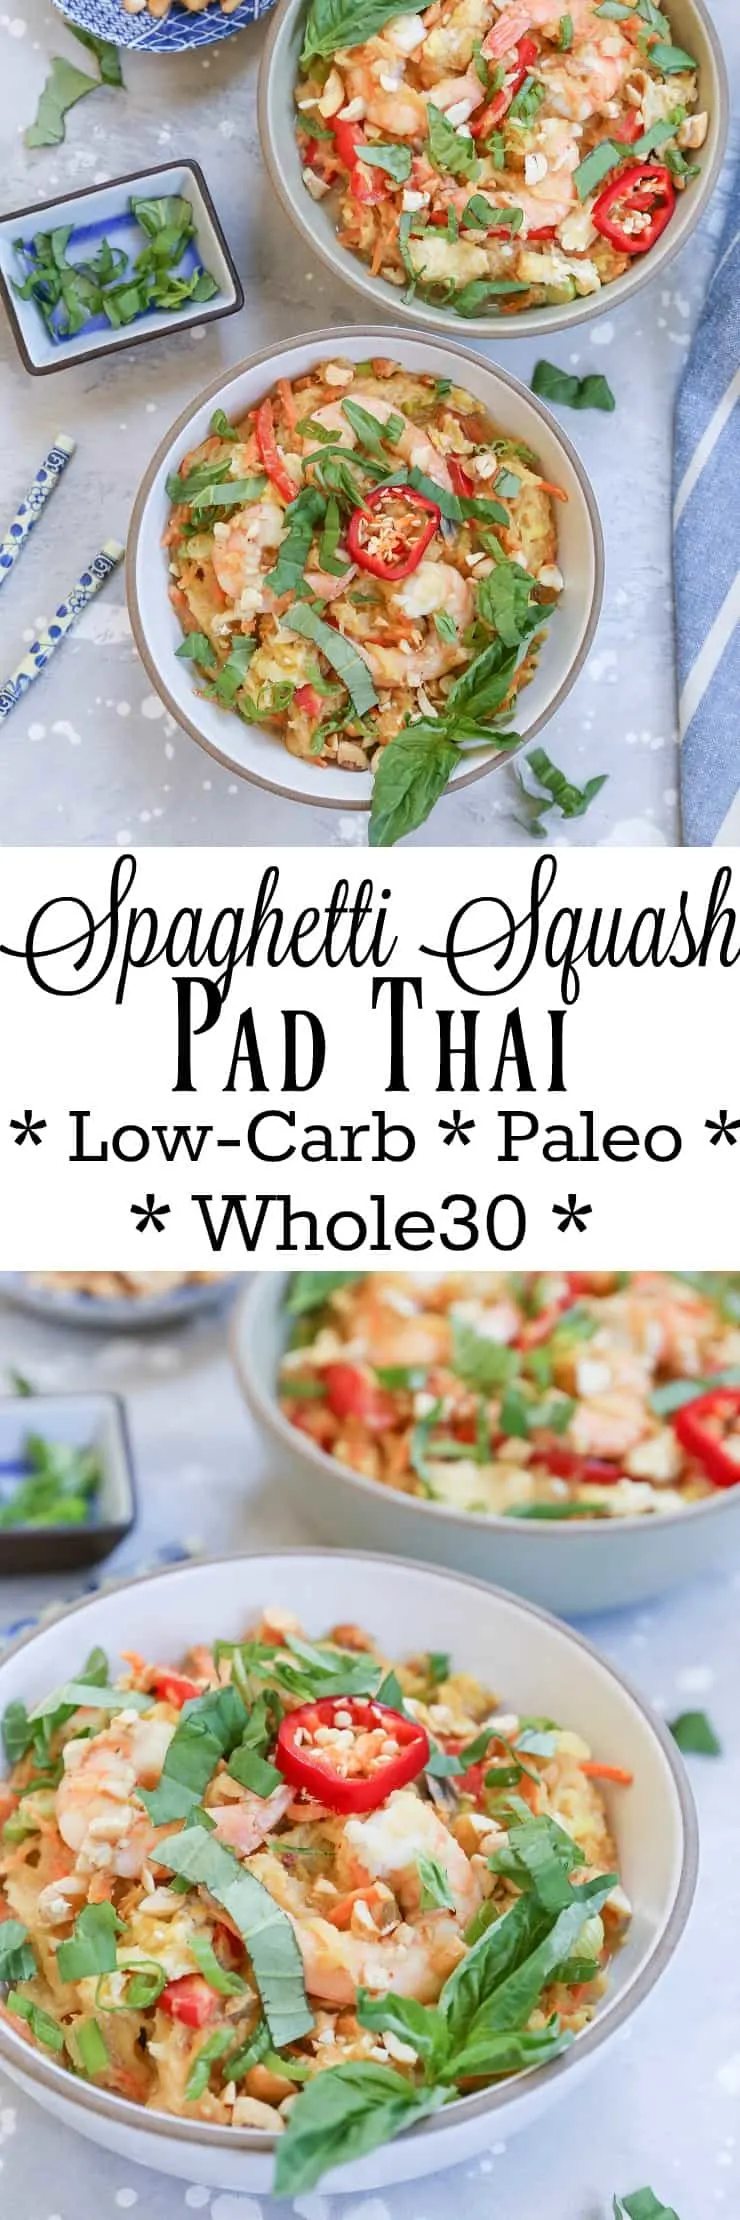 Spaghetti Squash Pad Thai - a low-carb, paleo version of the classic dish. This easy meal is Whole30-approved and healthy!